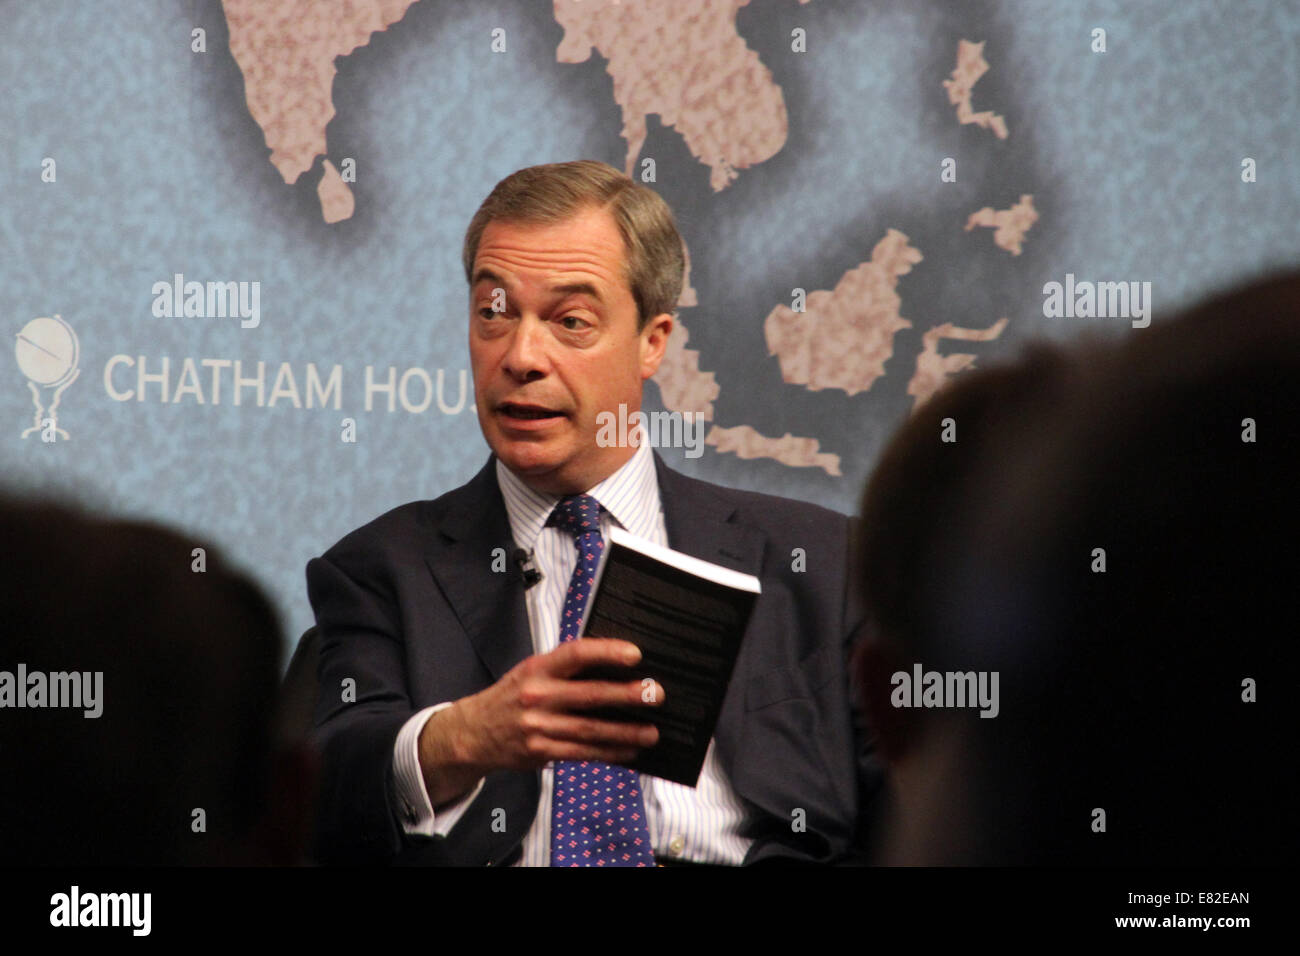 Nigel Farage, leader of the UK Independence Party, speaking at Chatham House in London on Monday 31 March 2014. Stock Photo